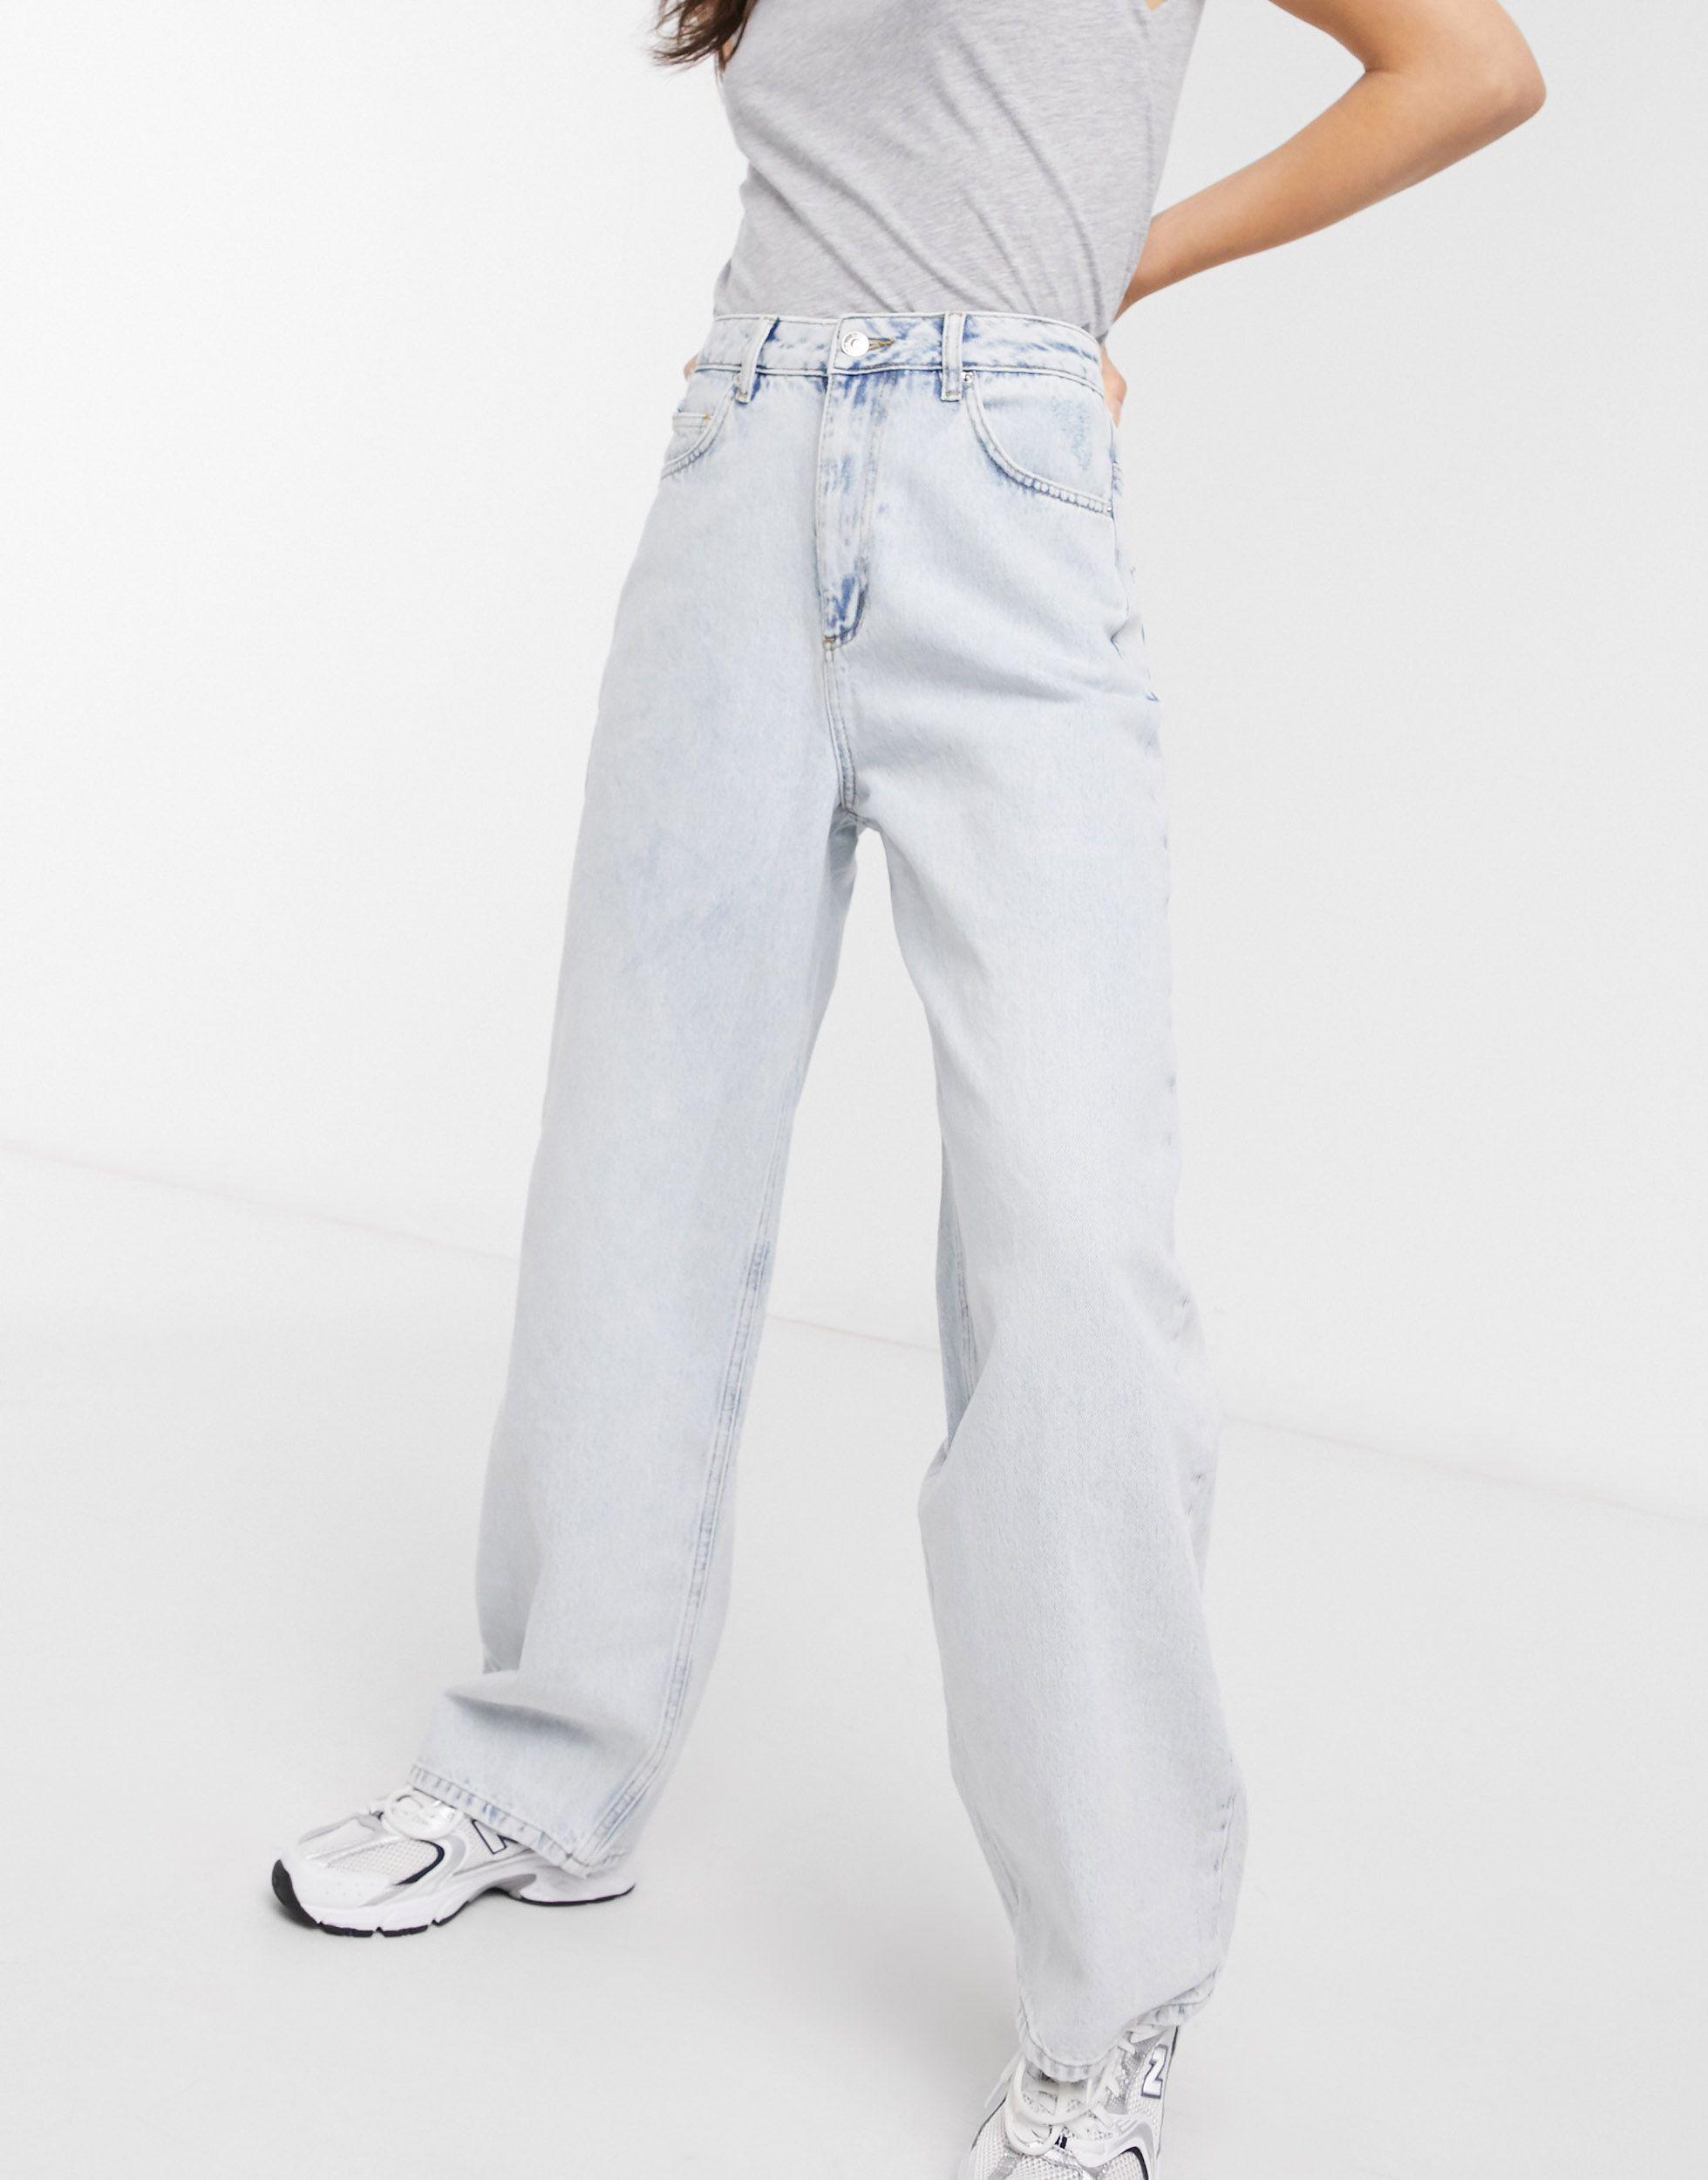 ASOS Denim High Rise 'relaxed' Dad Jeans in Blue - Lyst